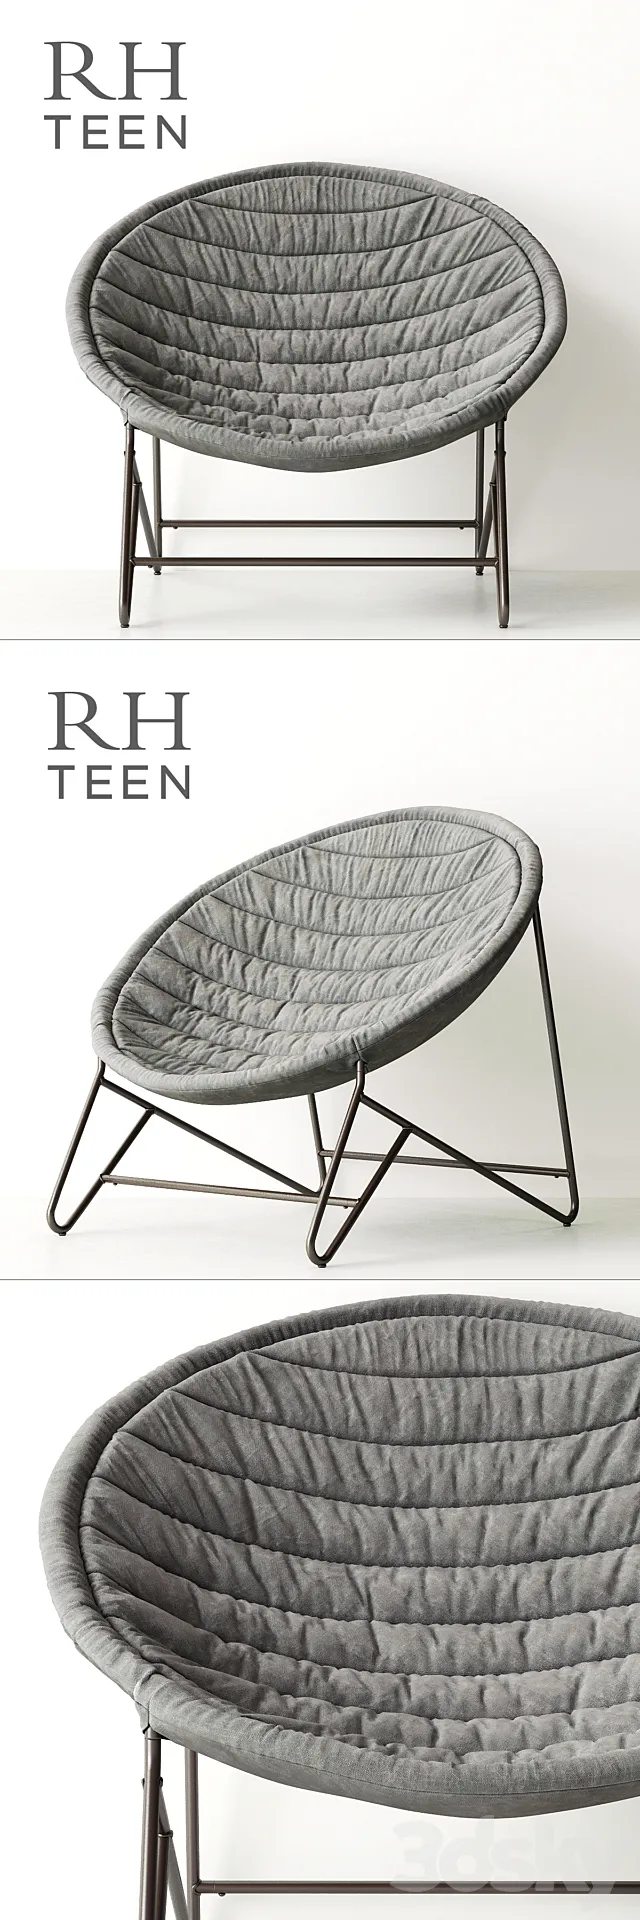 RH _ COSMO LOUNGE CHAIR 3DSMax File